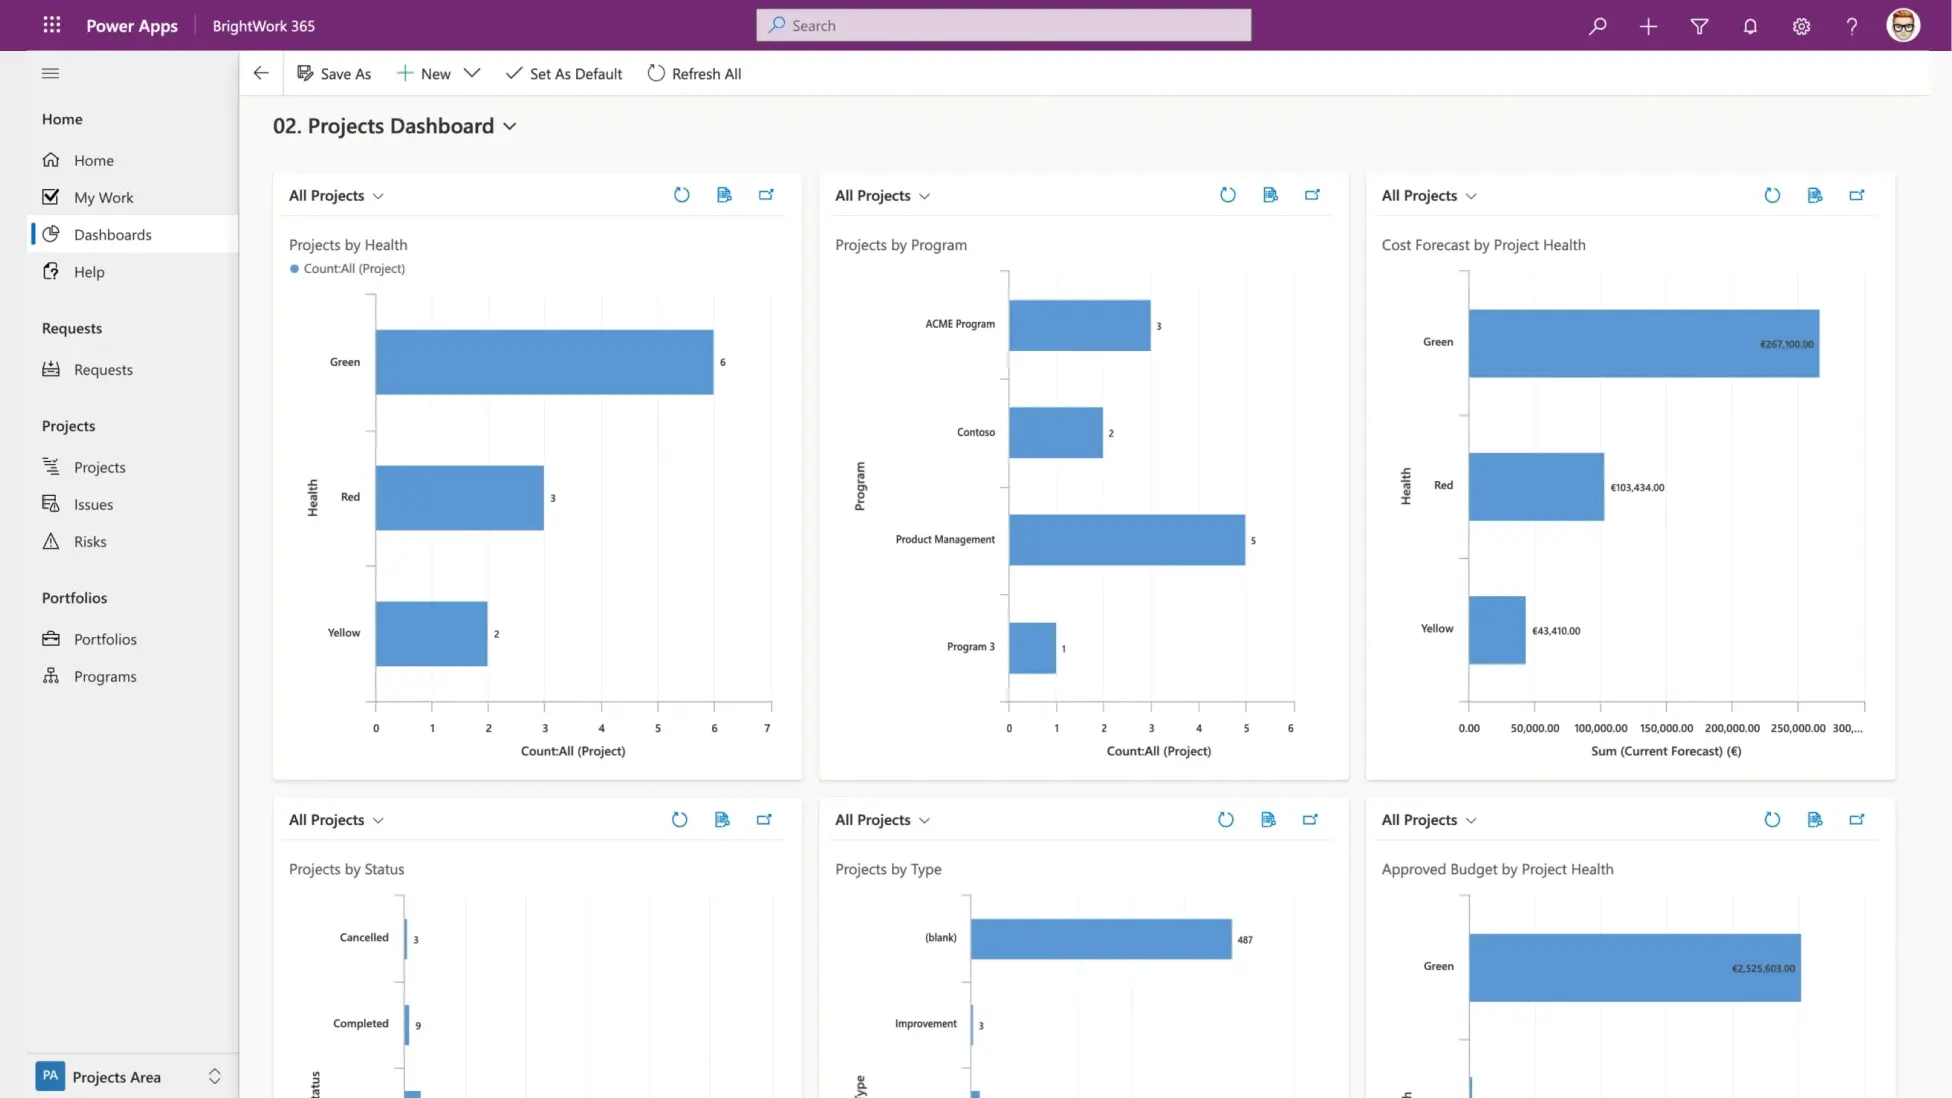 Power Apps Dashboards: 5 Dashboards for Enhanced Project Reporting [Video]